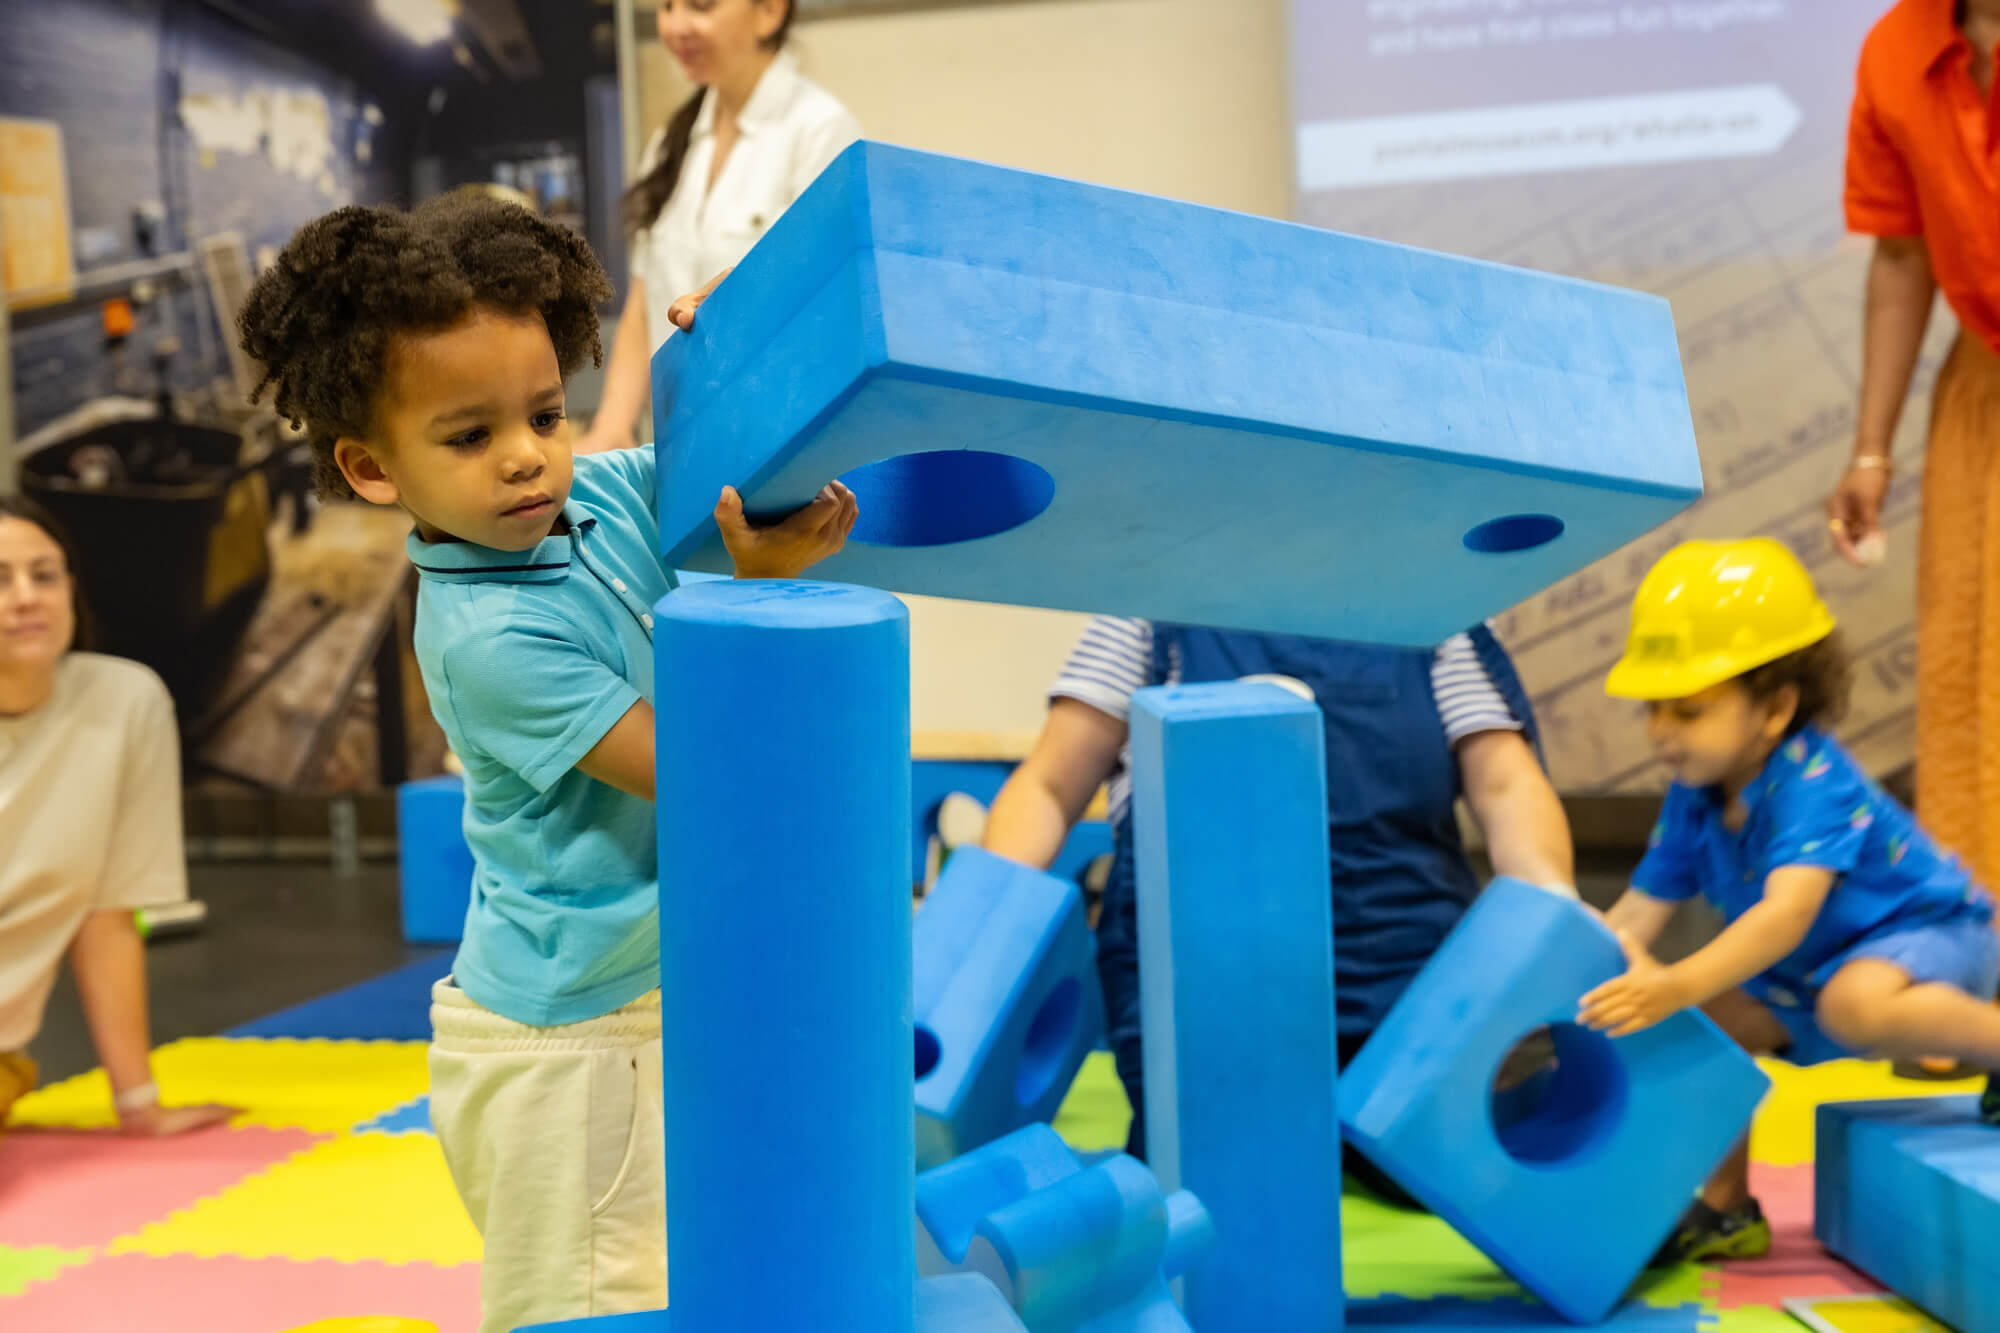 A toddler playing with big blue foam blocks on a play mat.